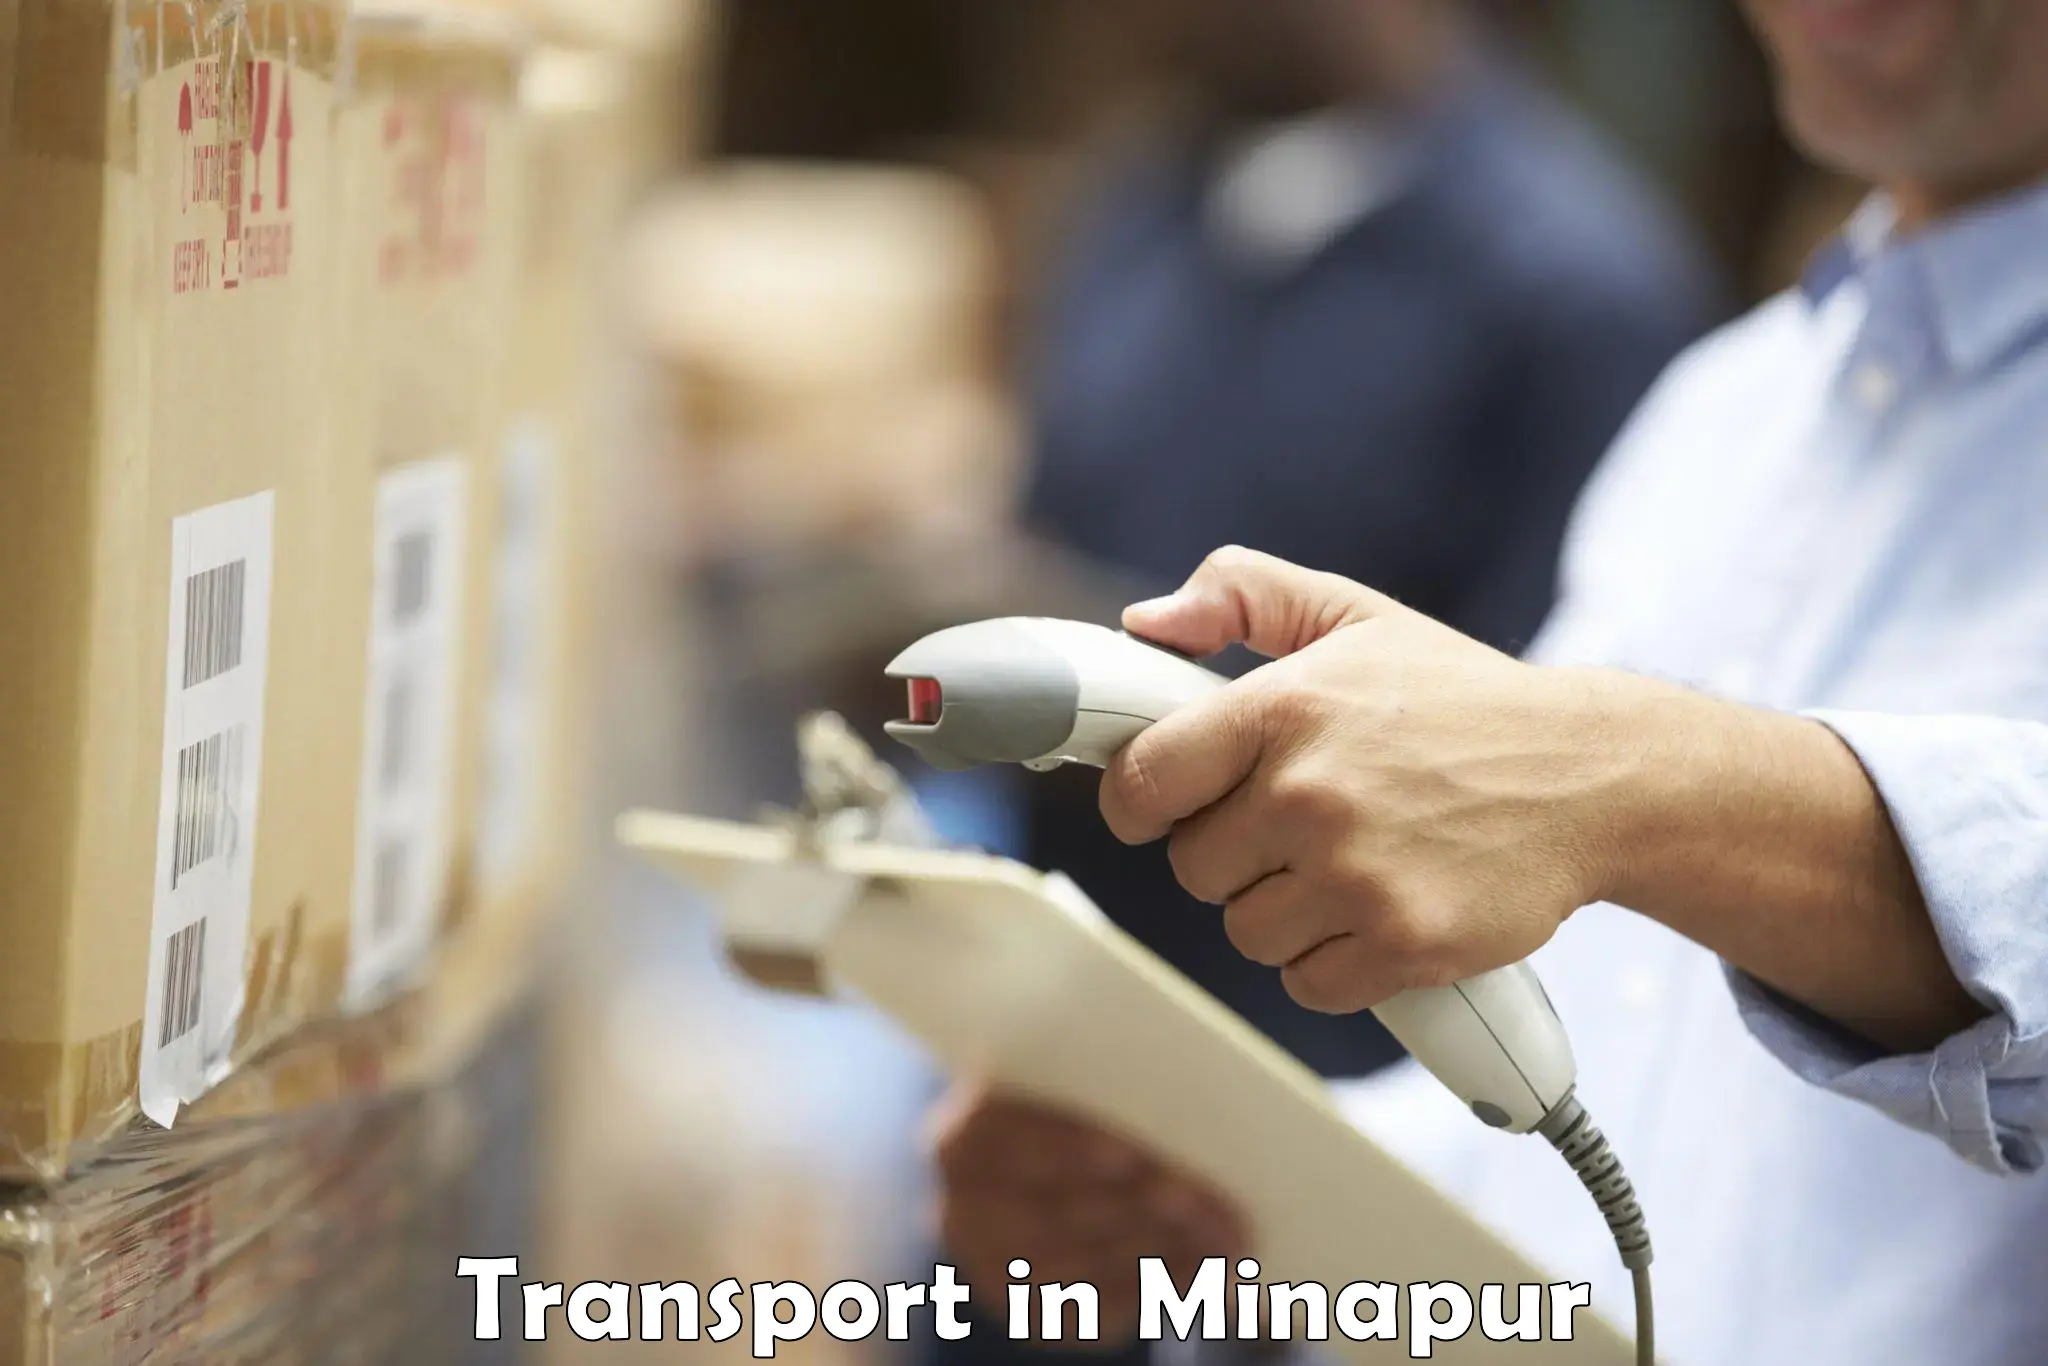 Daily transport service in Minapur